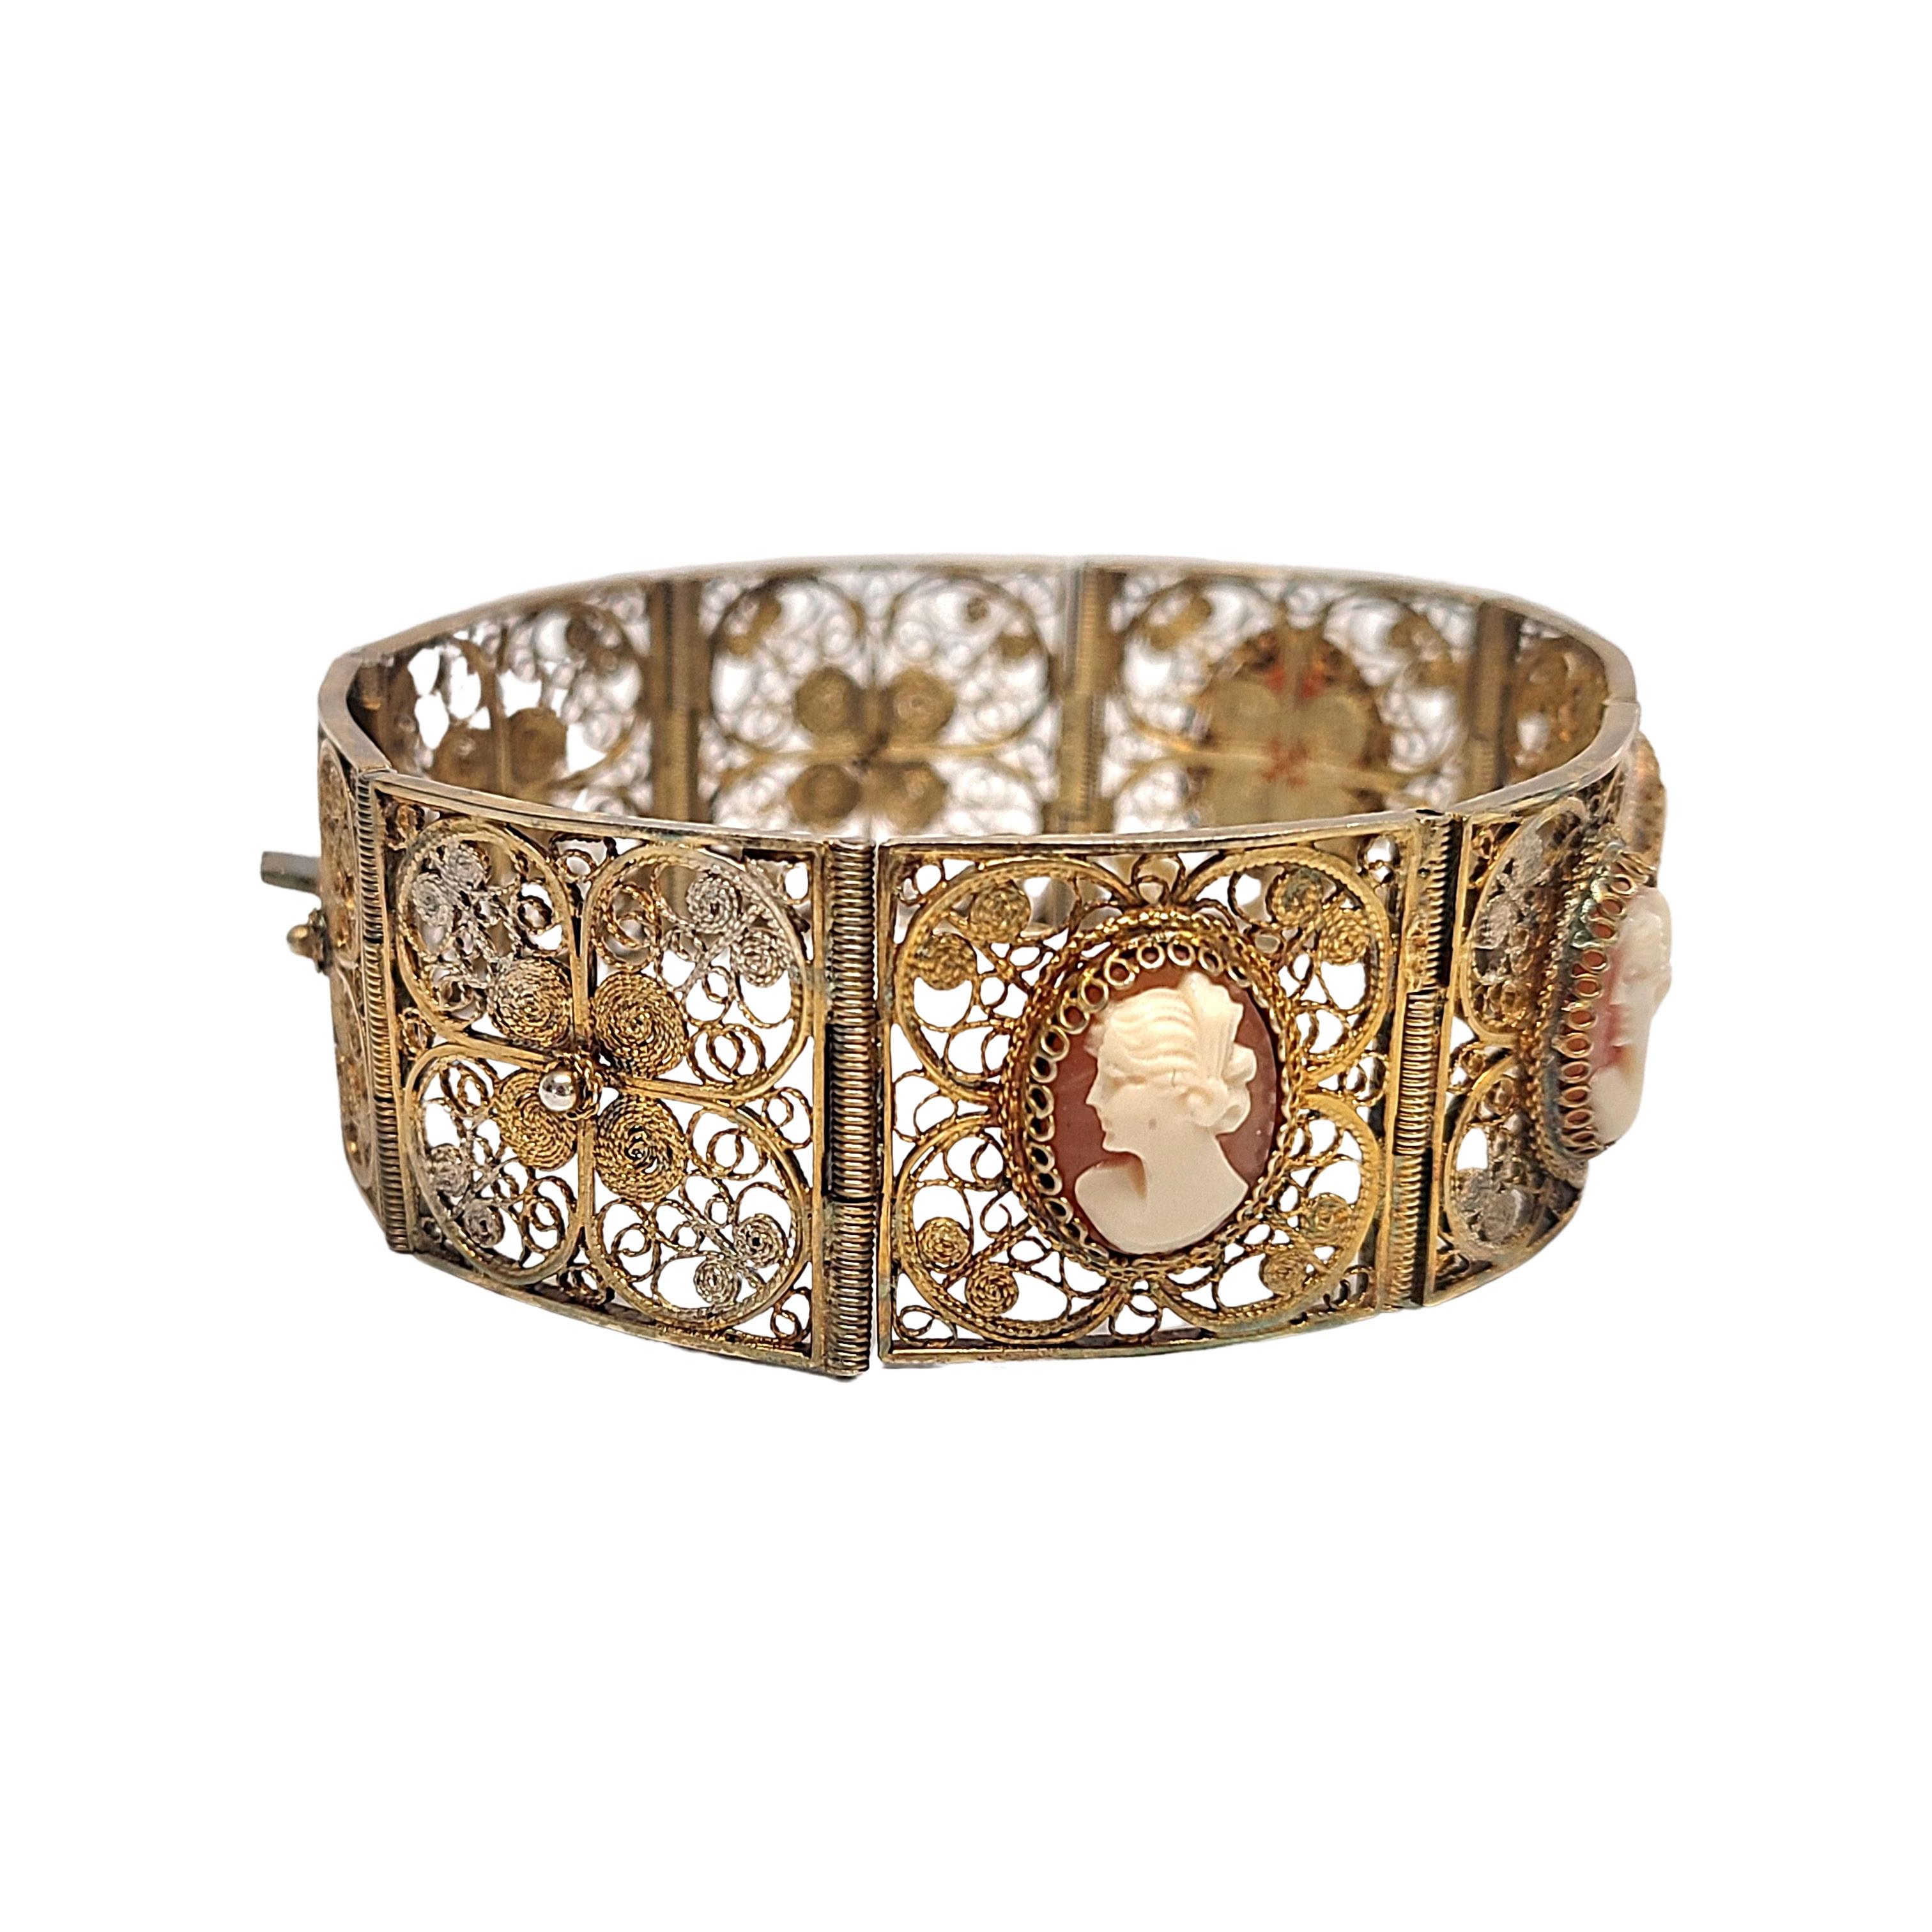 Gold wash 800 silver filigree round link bracelet with round cameo stones.

Beautiful and delicate square filigree links, 4 links feature an oval cameo at the center of each link. Slide closure.

Measures 7